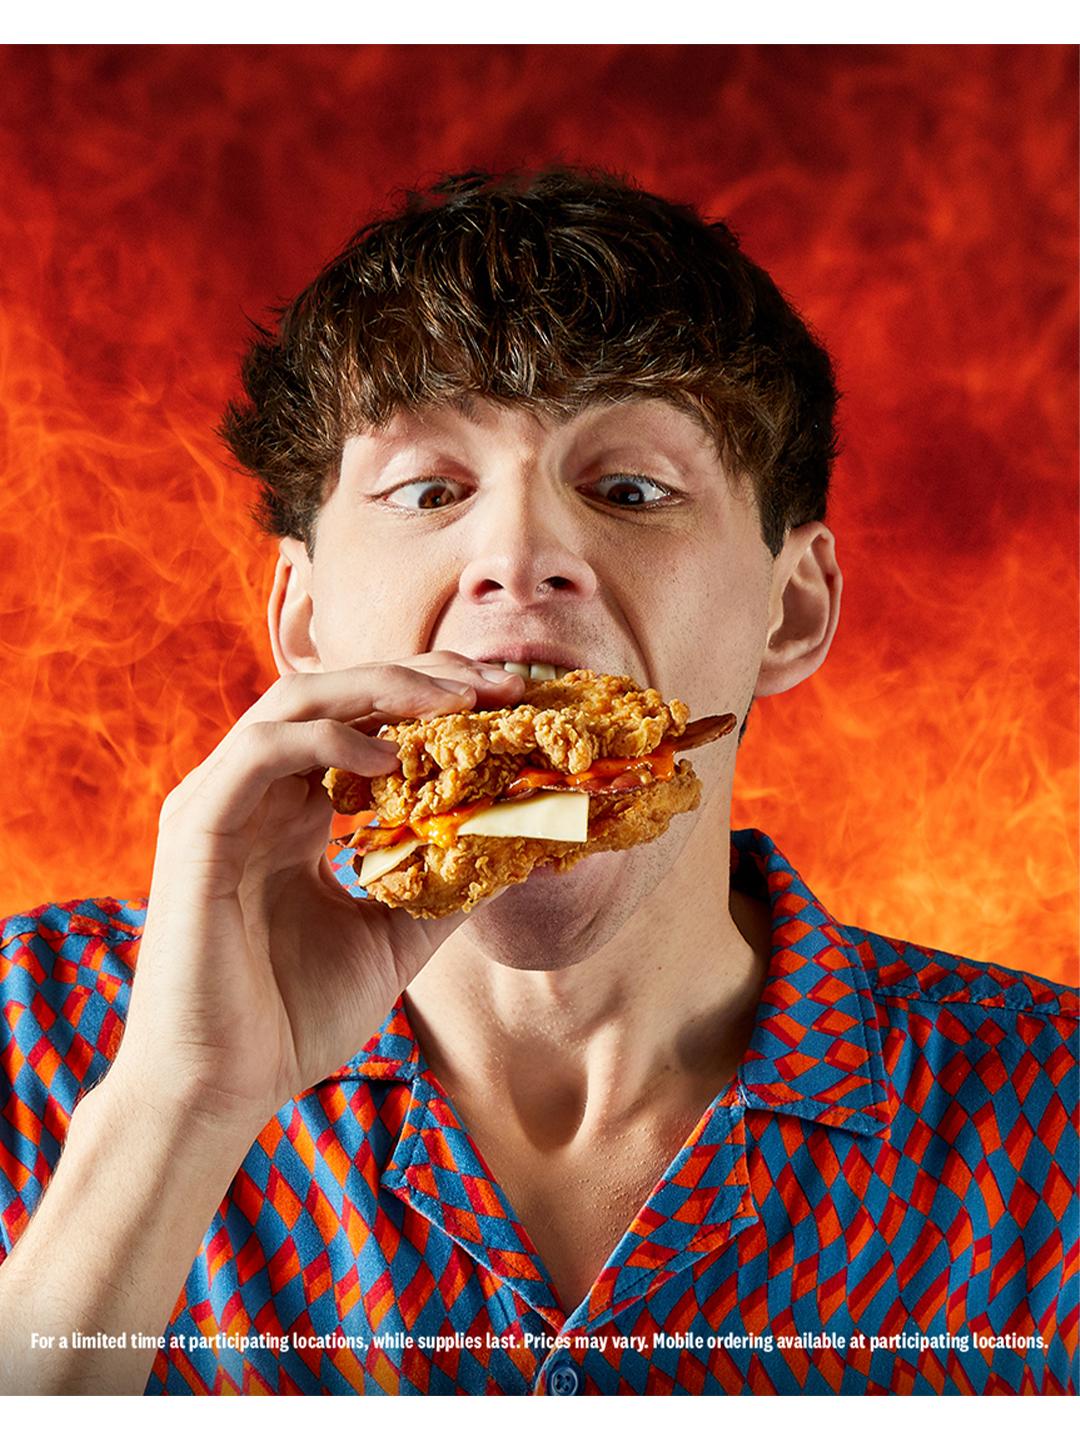 guy biting into double down sandwich